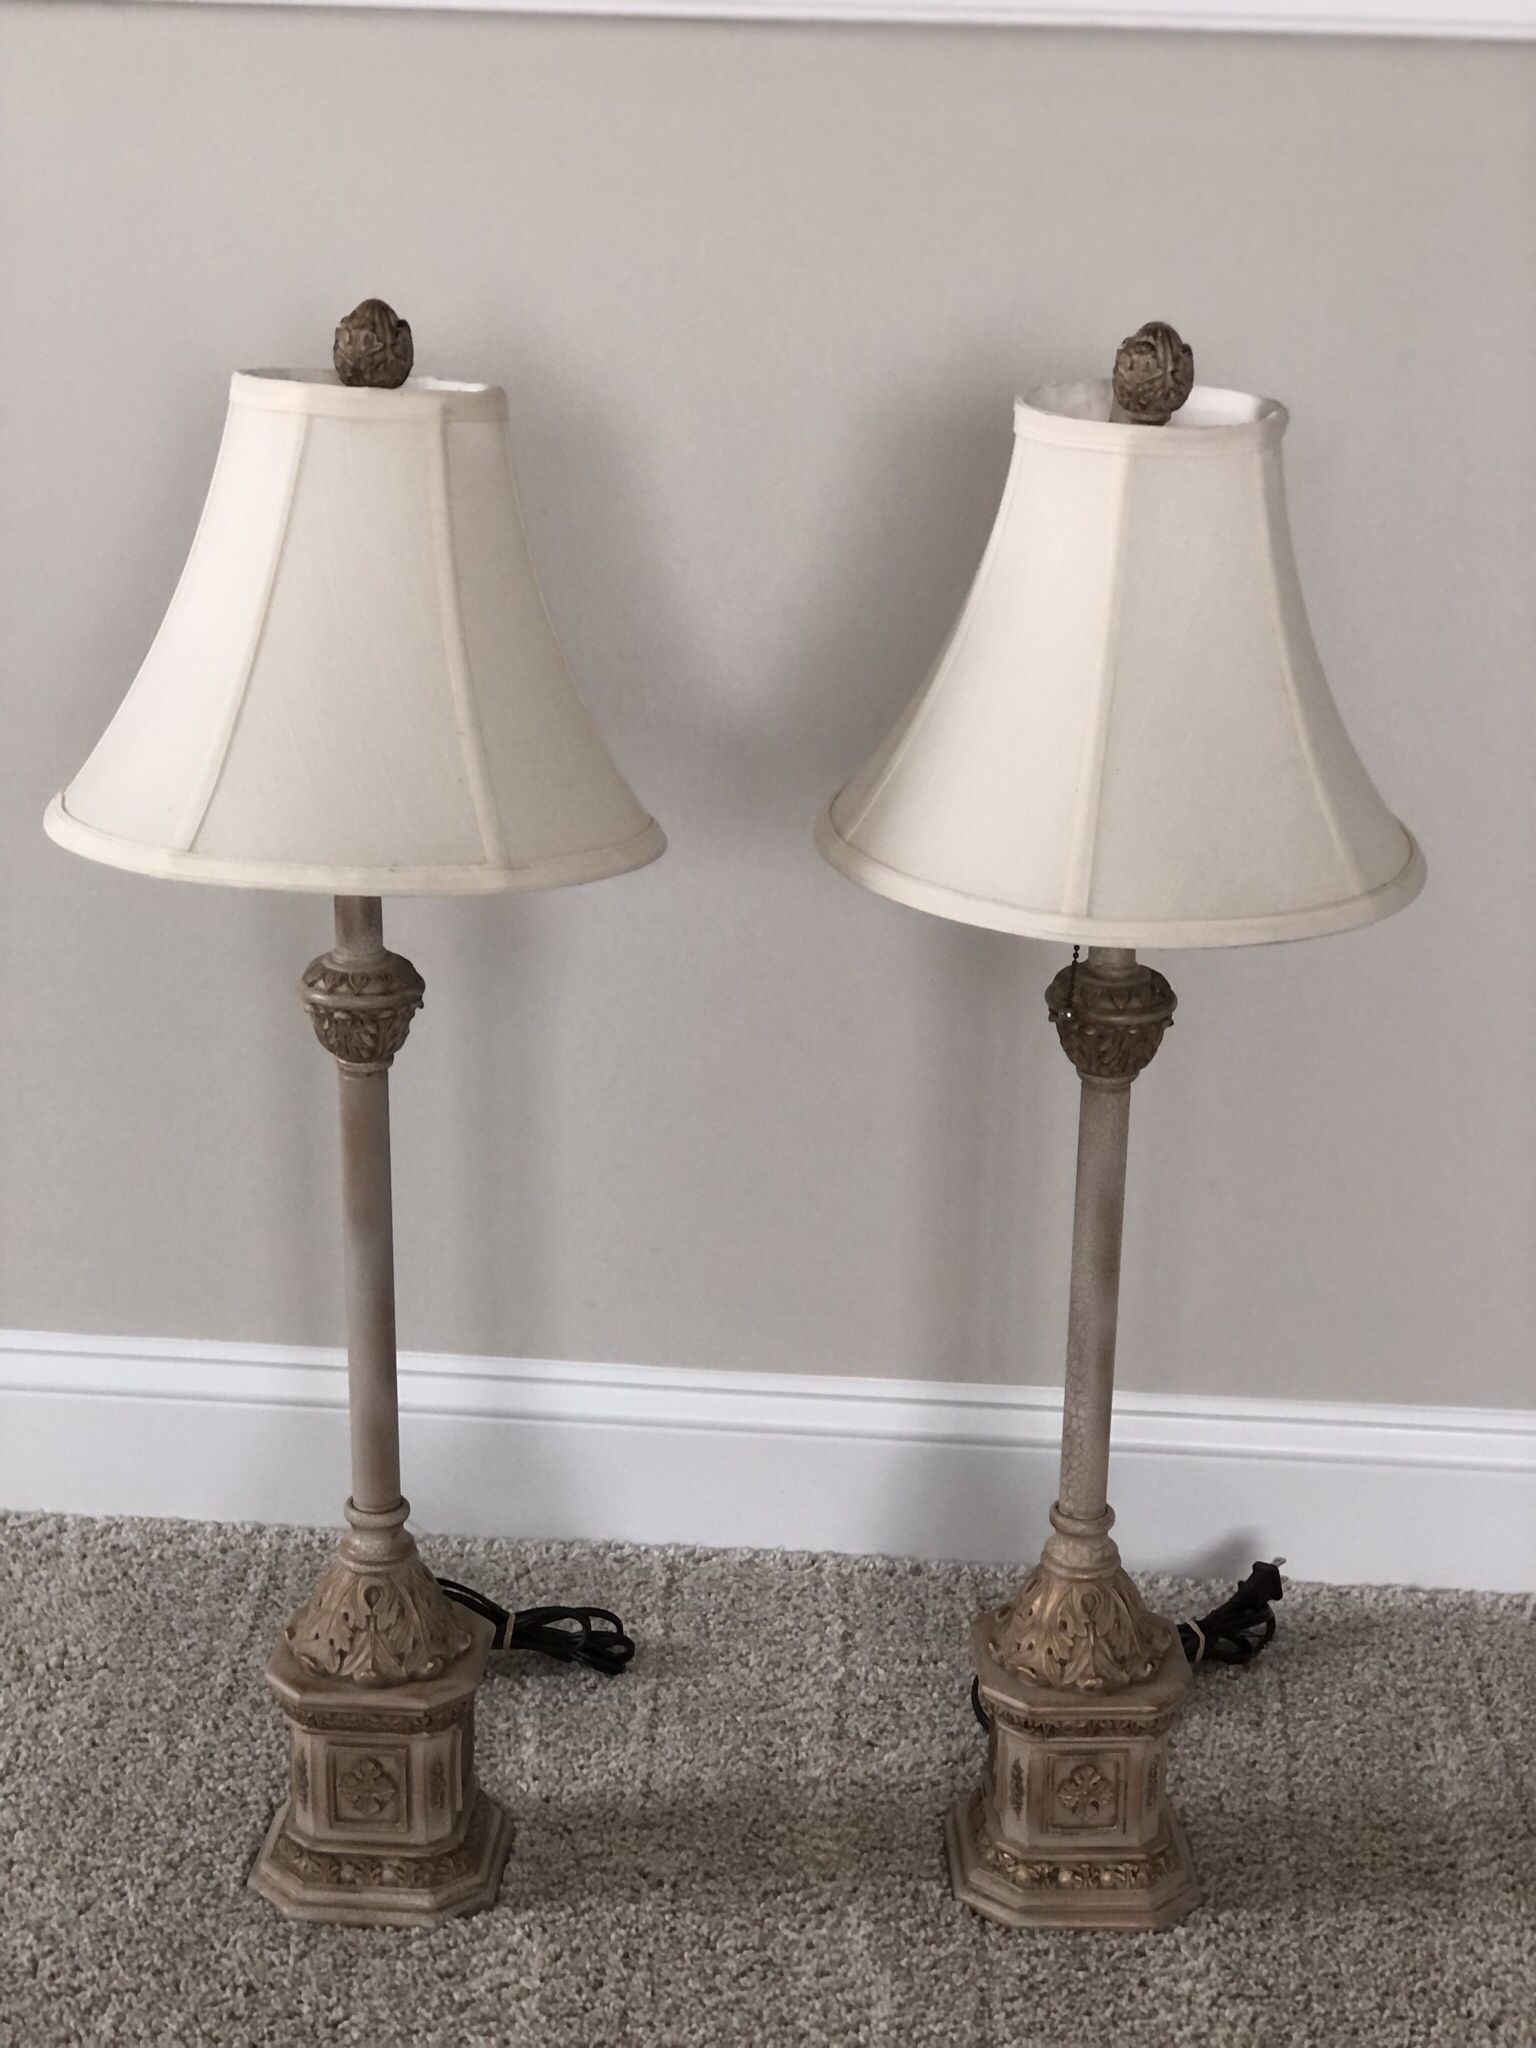 Vintage lamps (price is for both)